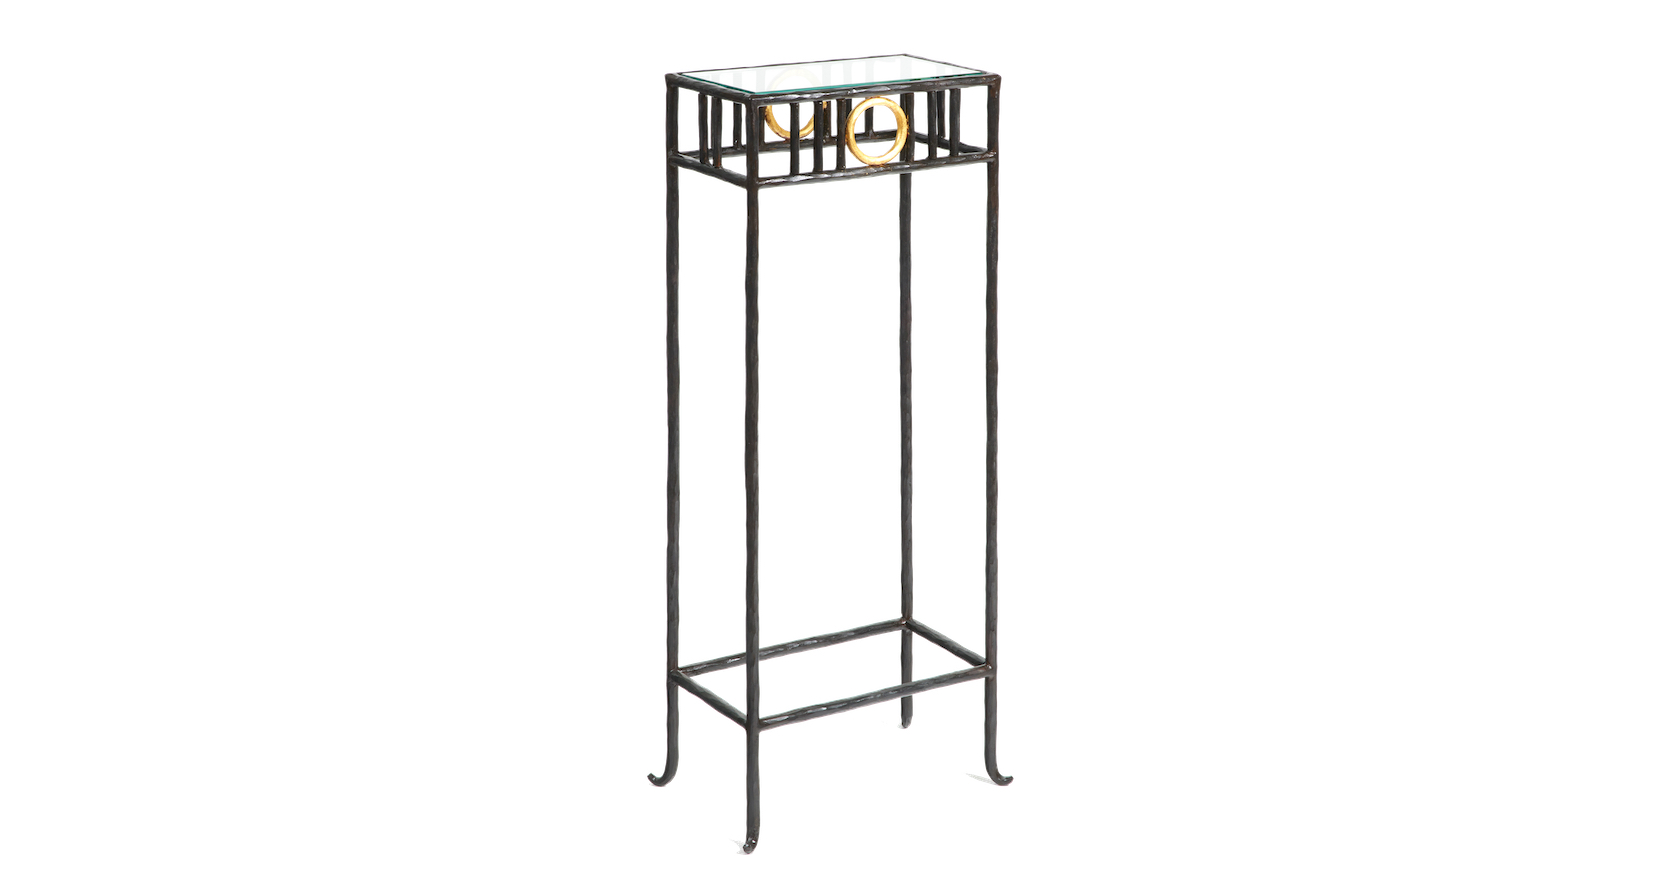 Garouste Bonetti, rectangular stand with 4 legs in black wrought iron, under the top, golden circles , top in glass